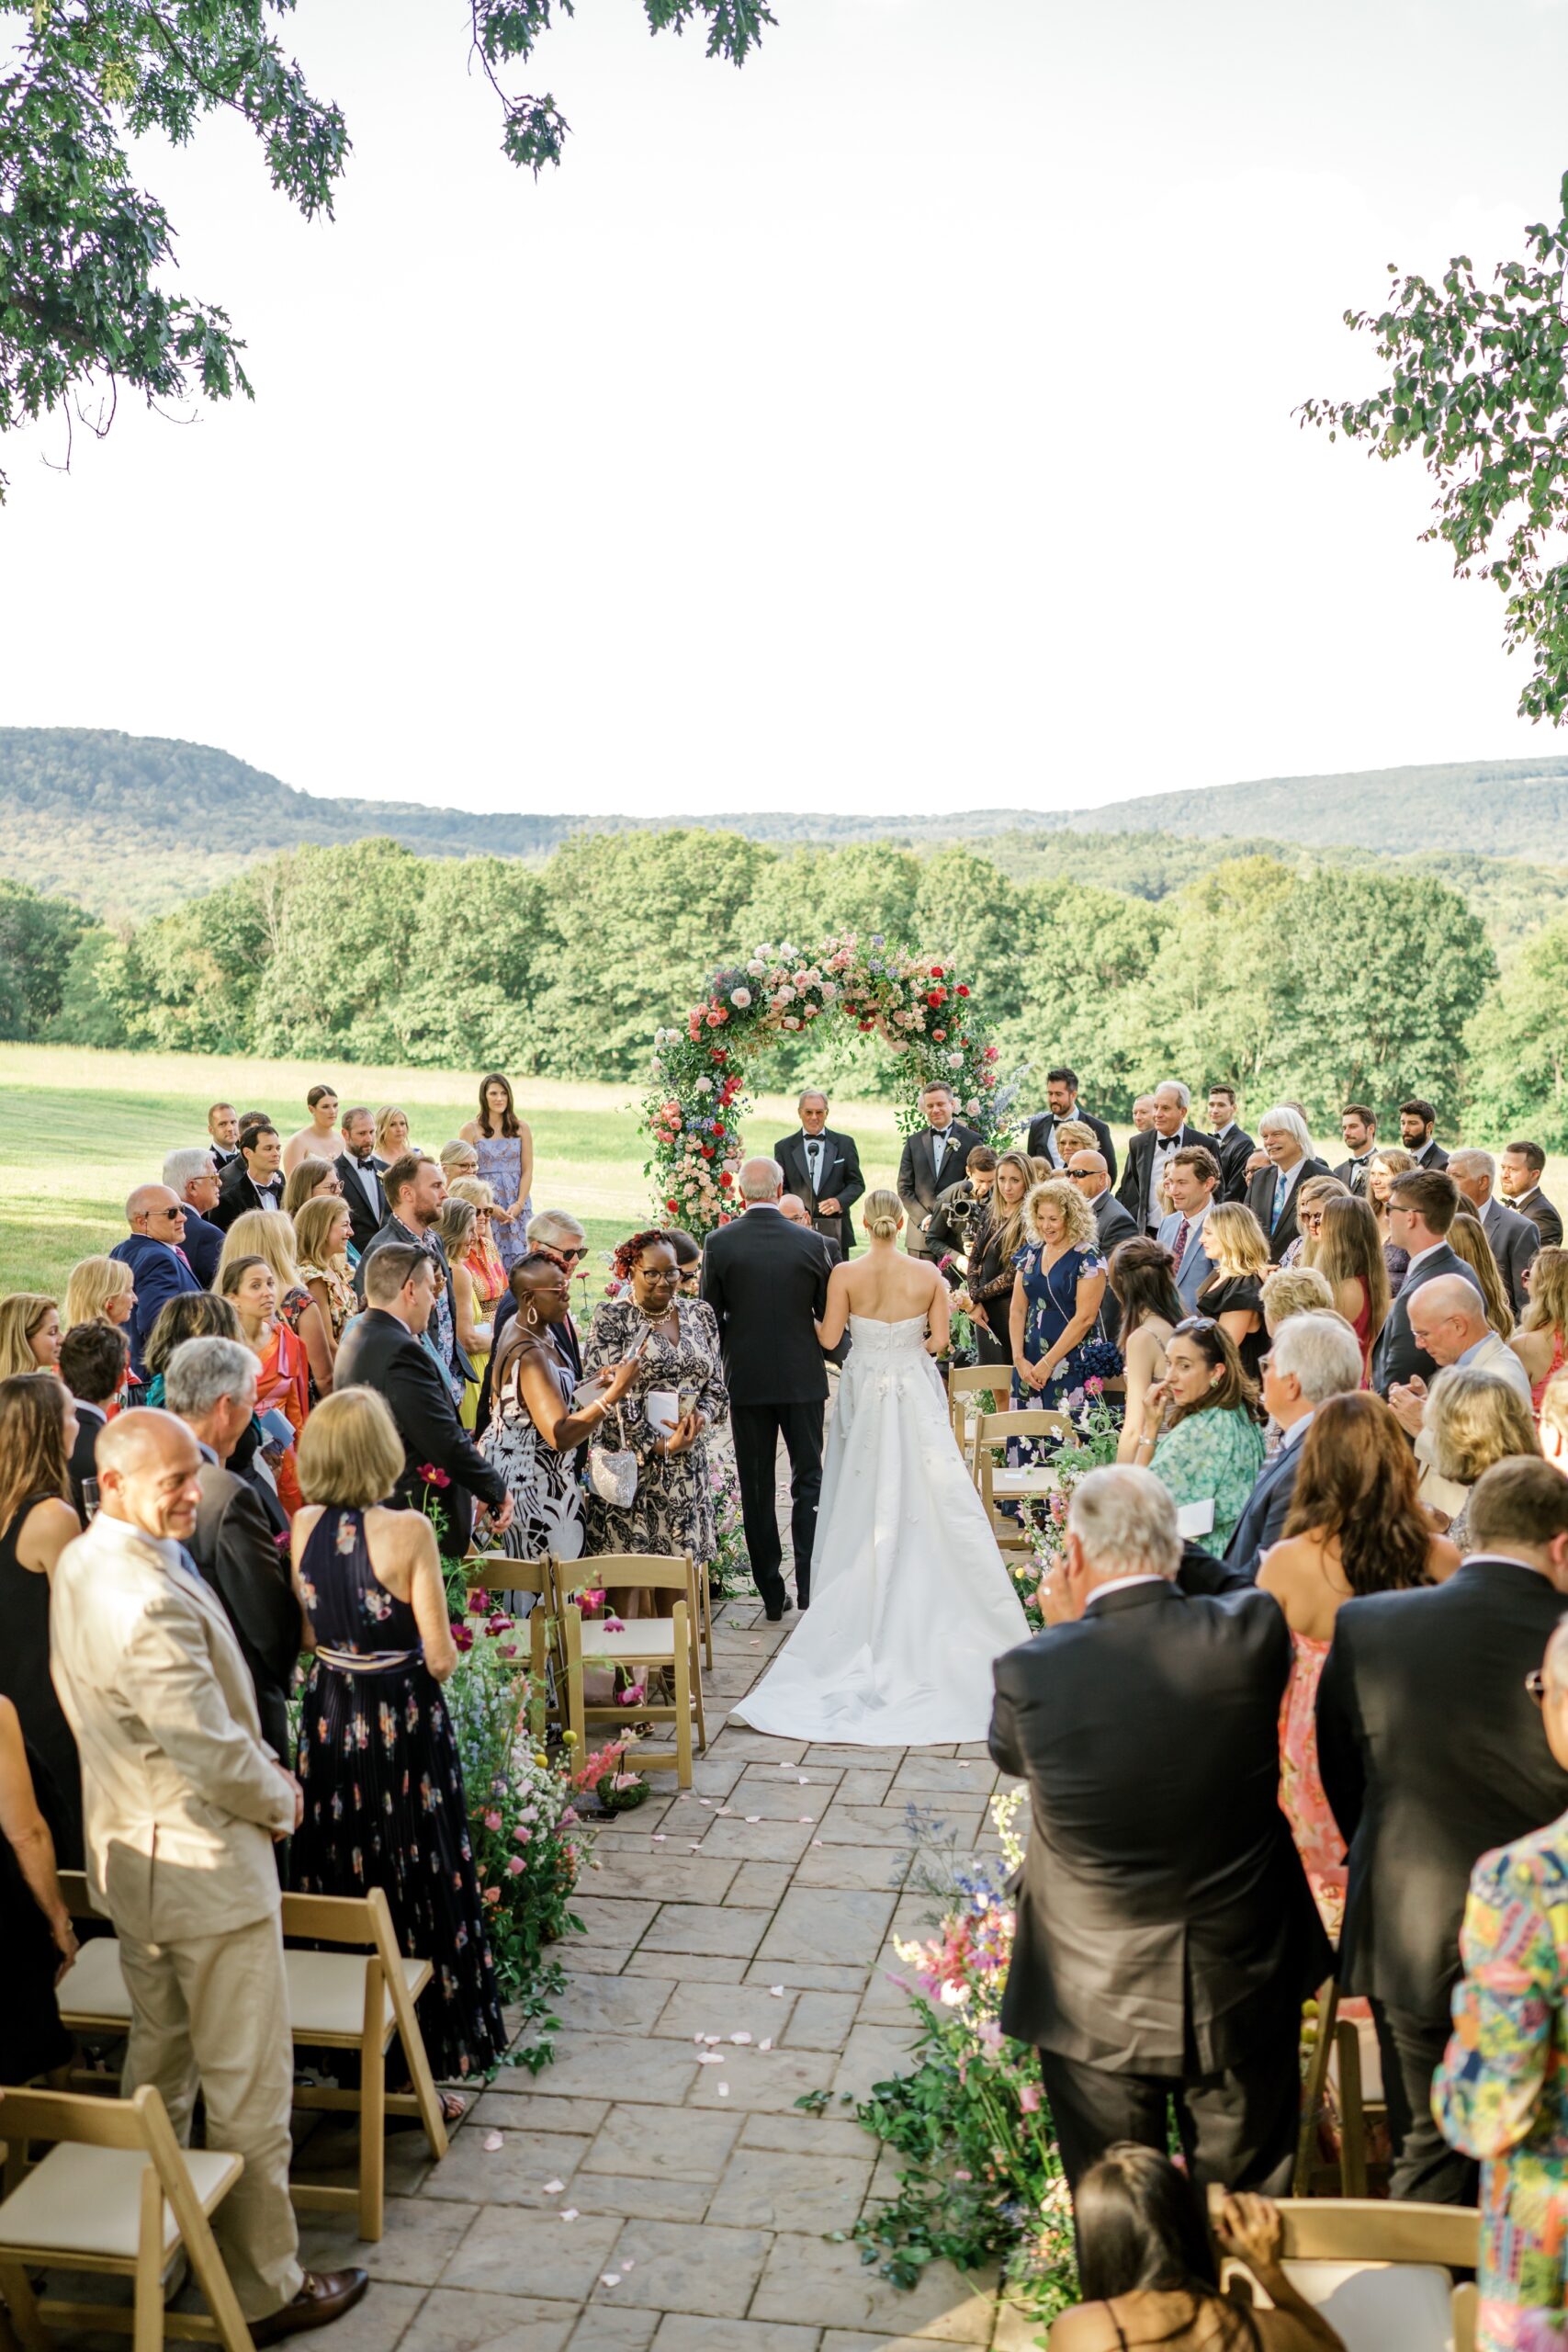 Bride walks down the aisle with father at Pocono Mountain wedding